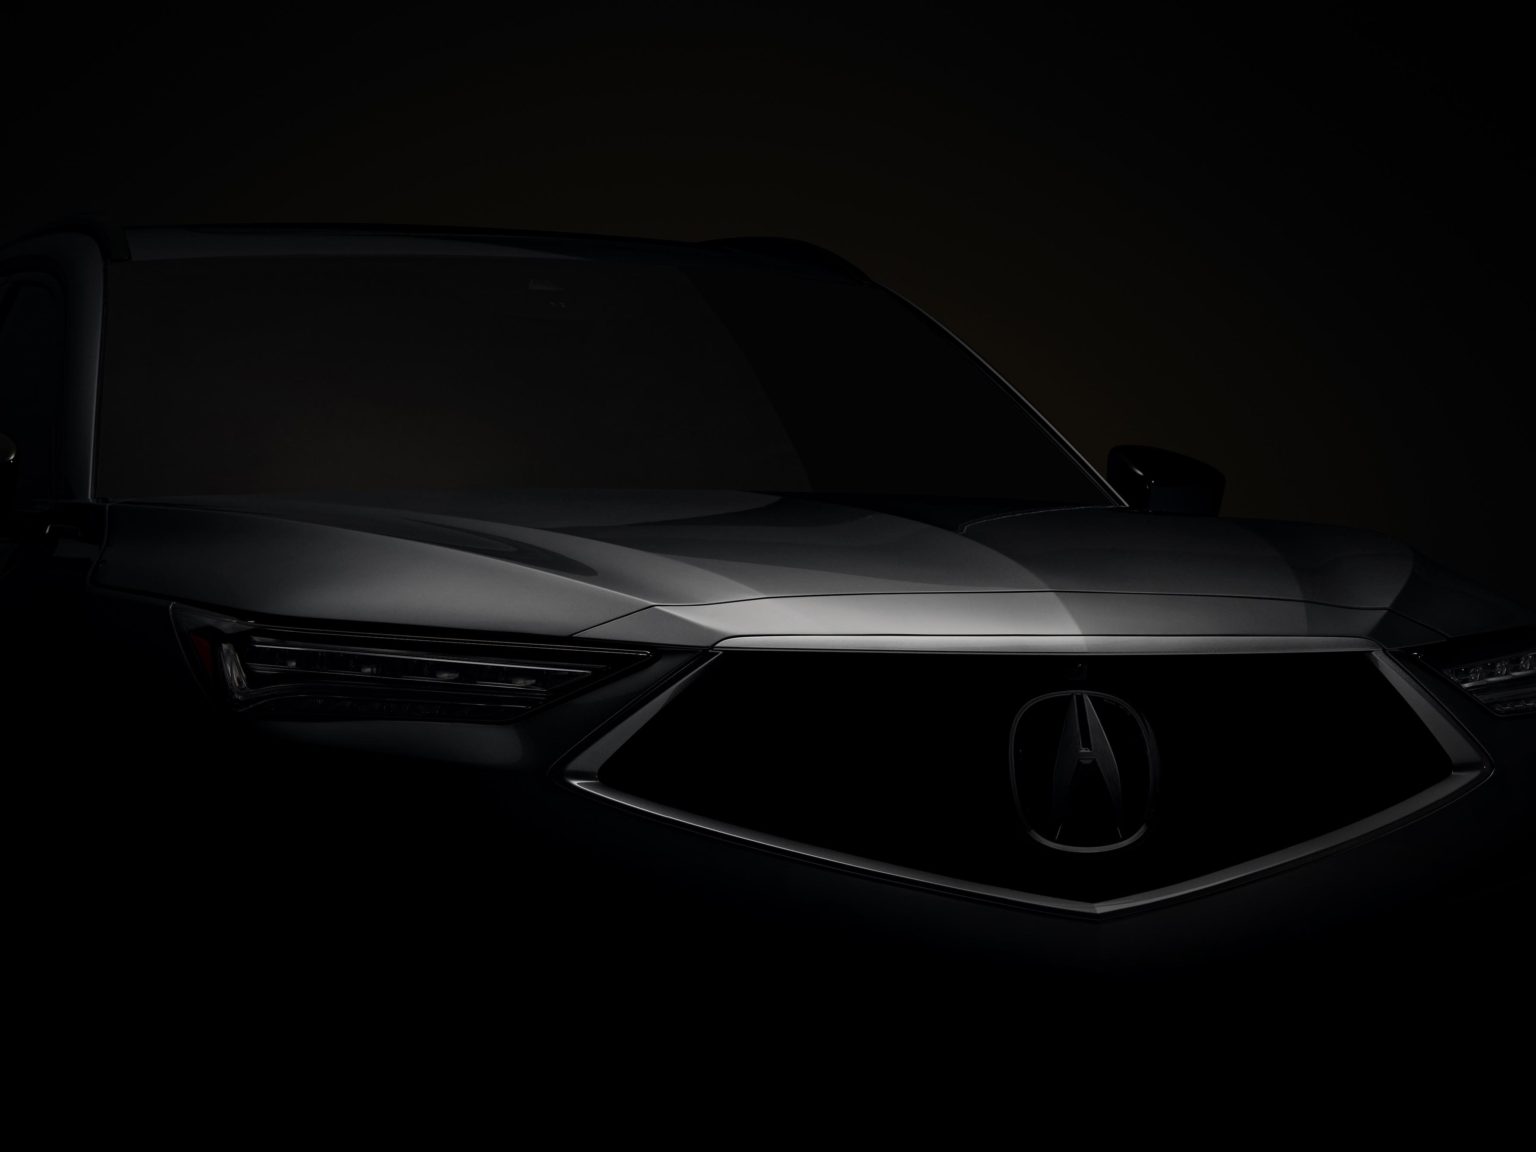 Acura has teased the forthcoming MDX with this photo.